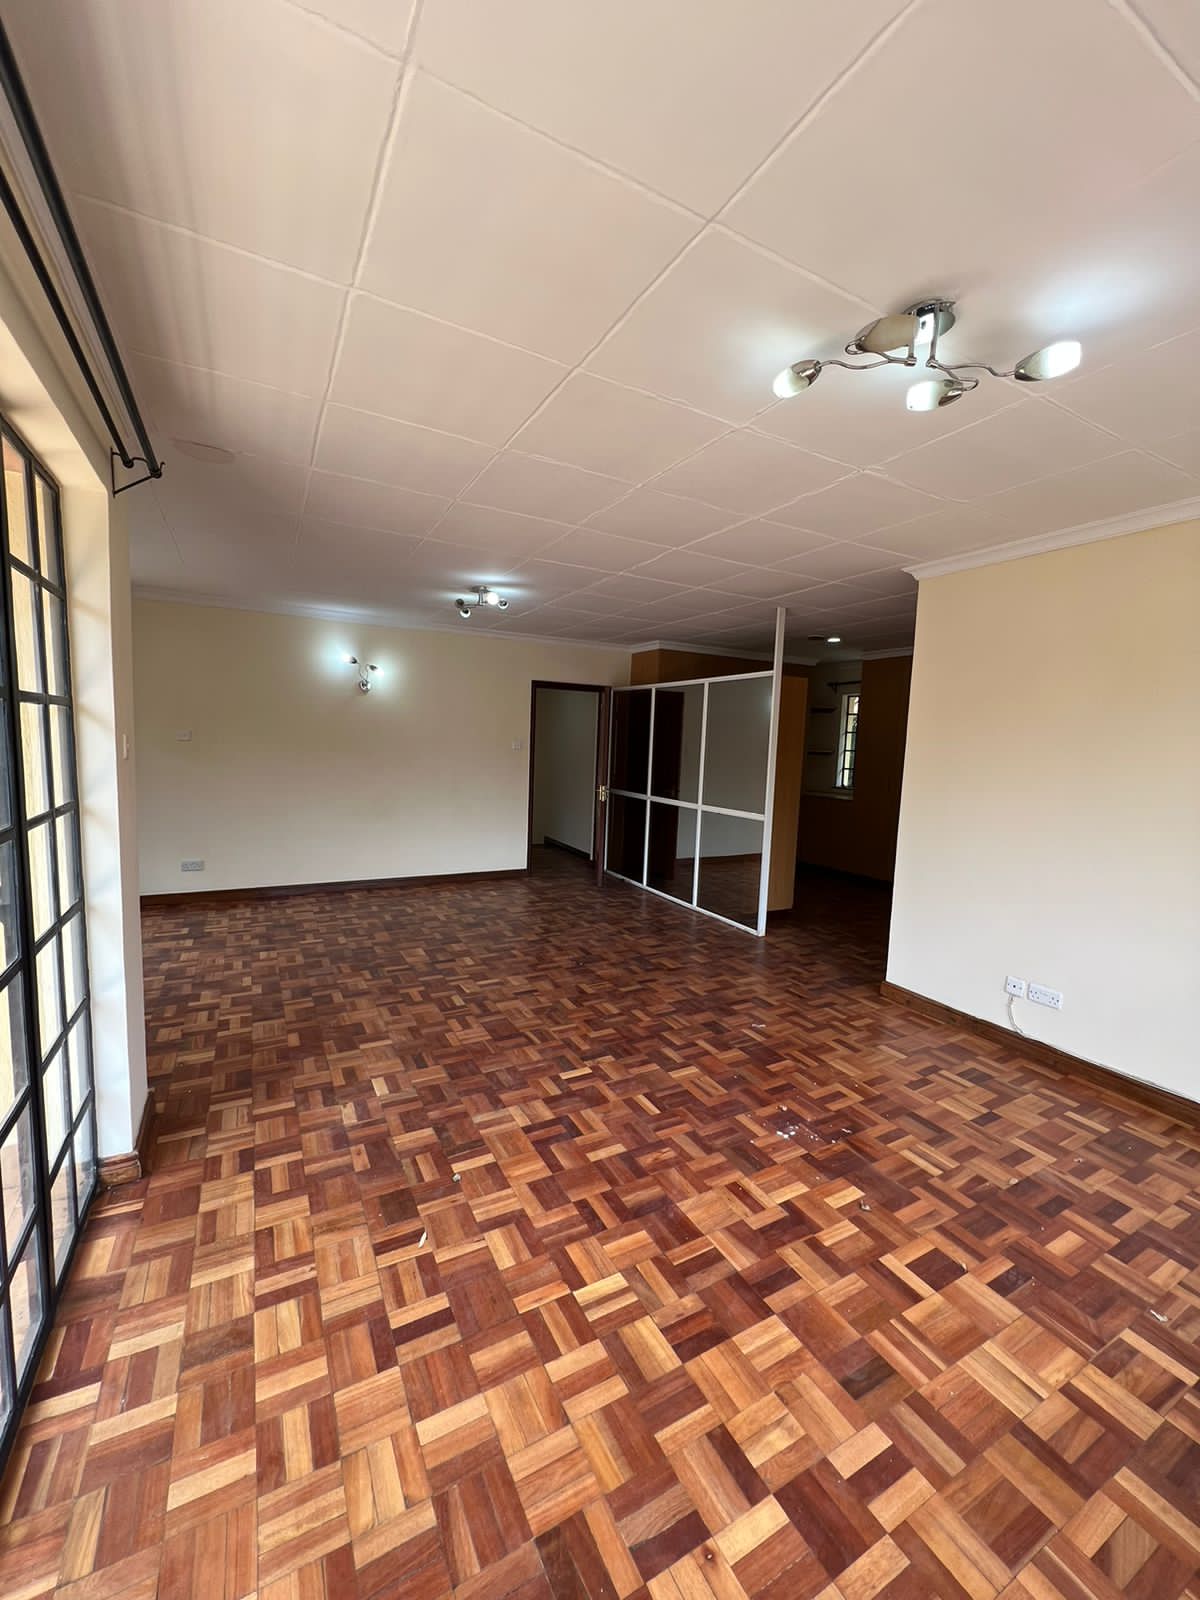 4 bedroom plus dsq townhouse to let located in the leafy suburb of kilimani, Nairobi. 2dsq available. In a gated community of 8 units. 220,000. Musilli Homes